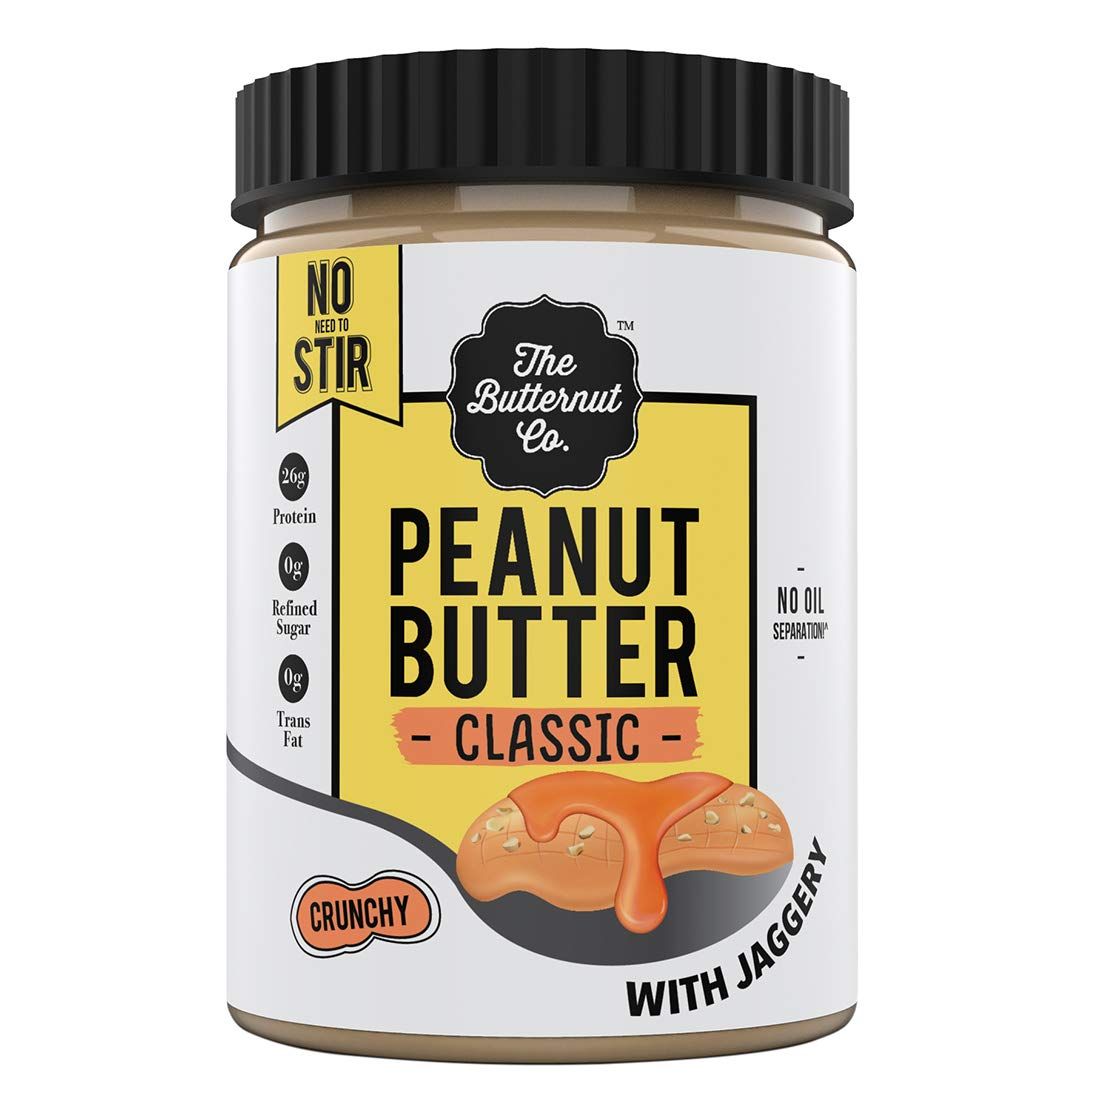 The Butternut Co Peanut Butter Classic with Jaggery Crunchy Image